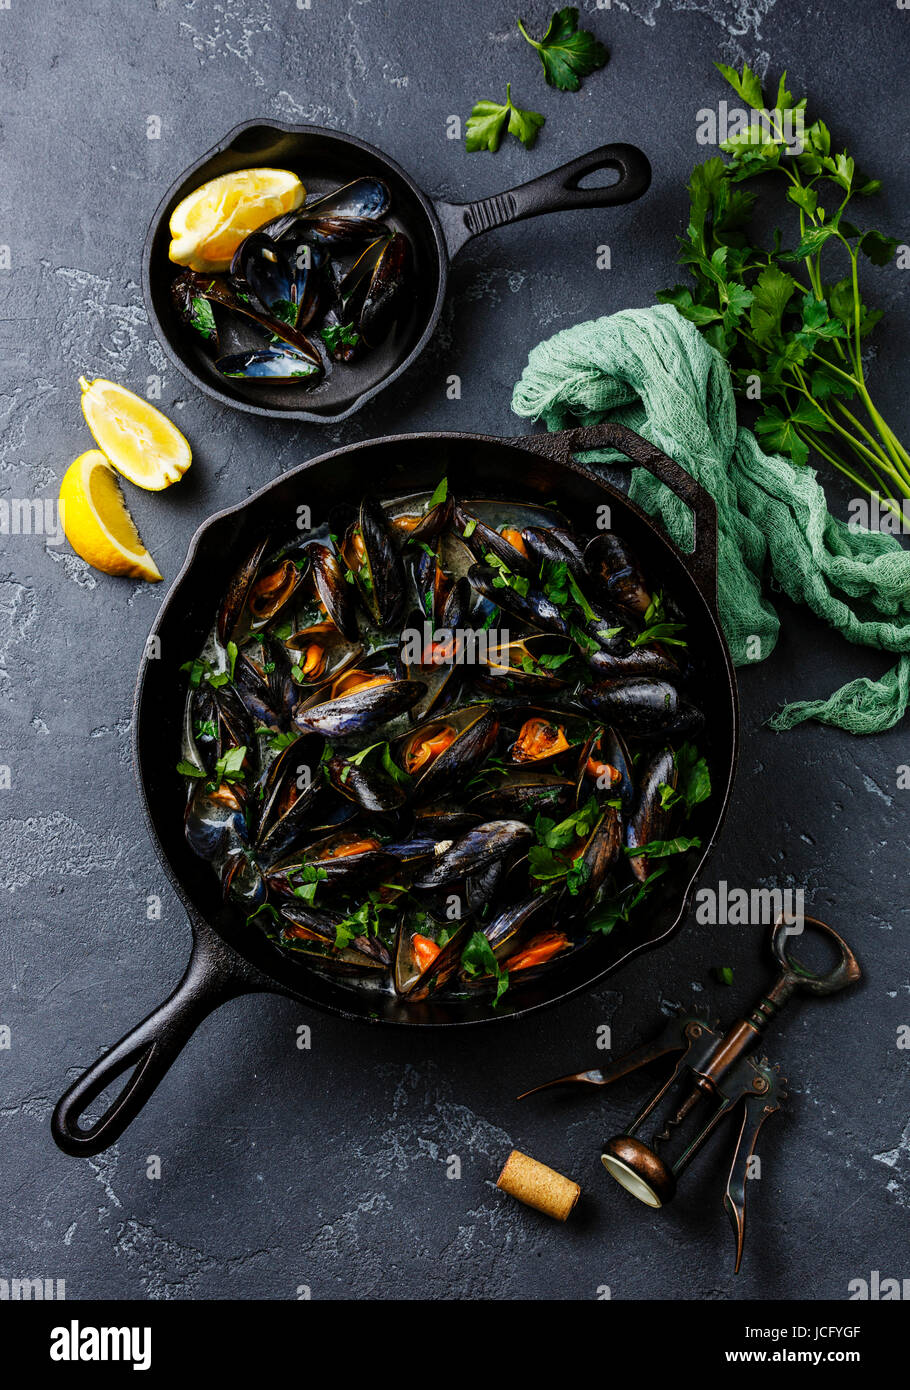 Mussels in black cooking pan with parsley on dark stone background Stock Photo